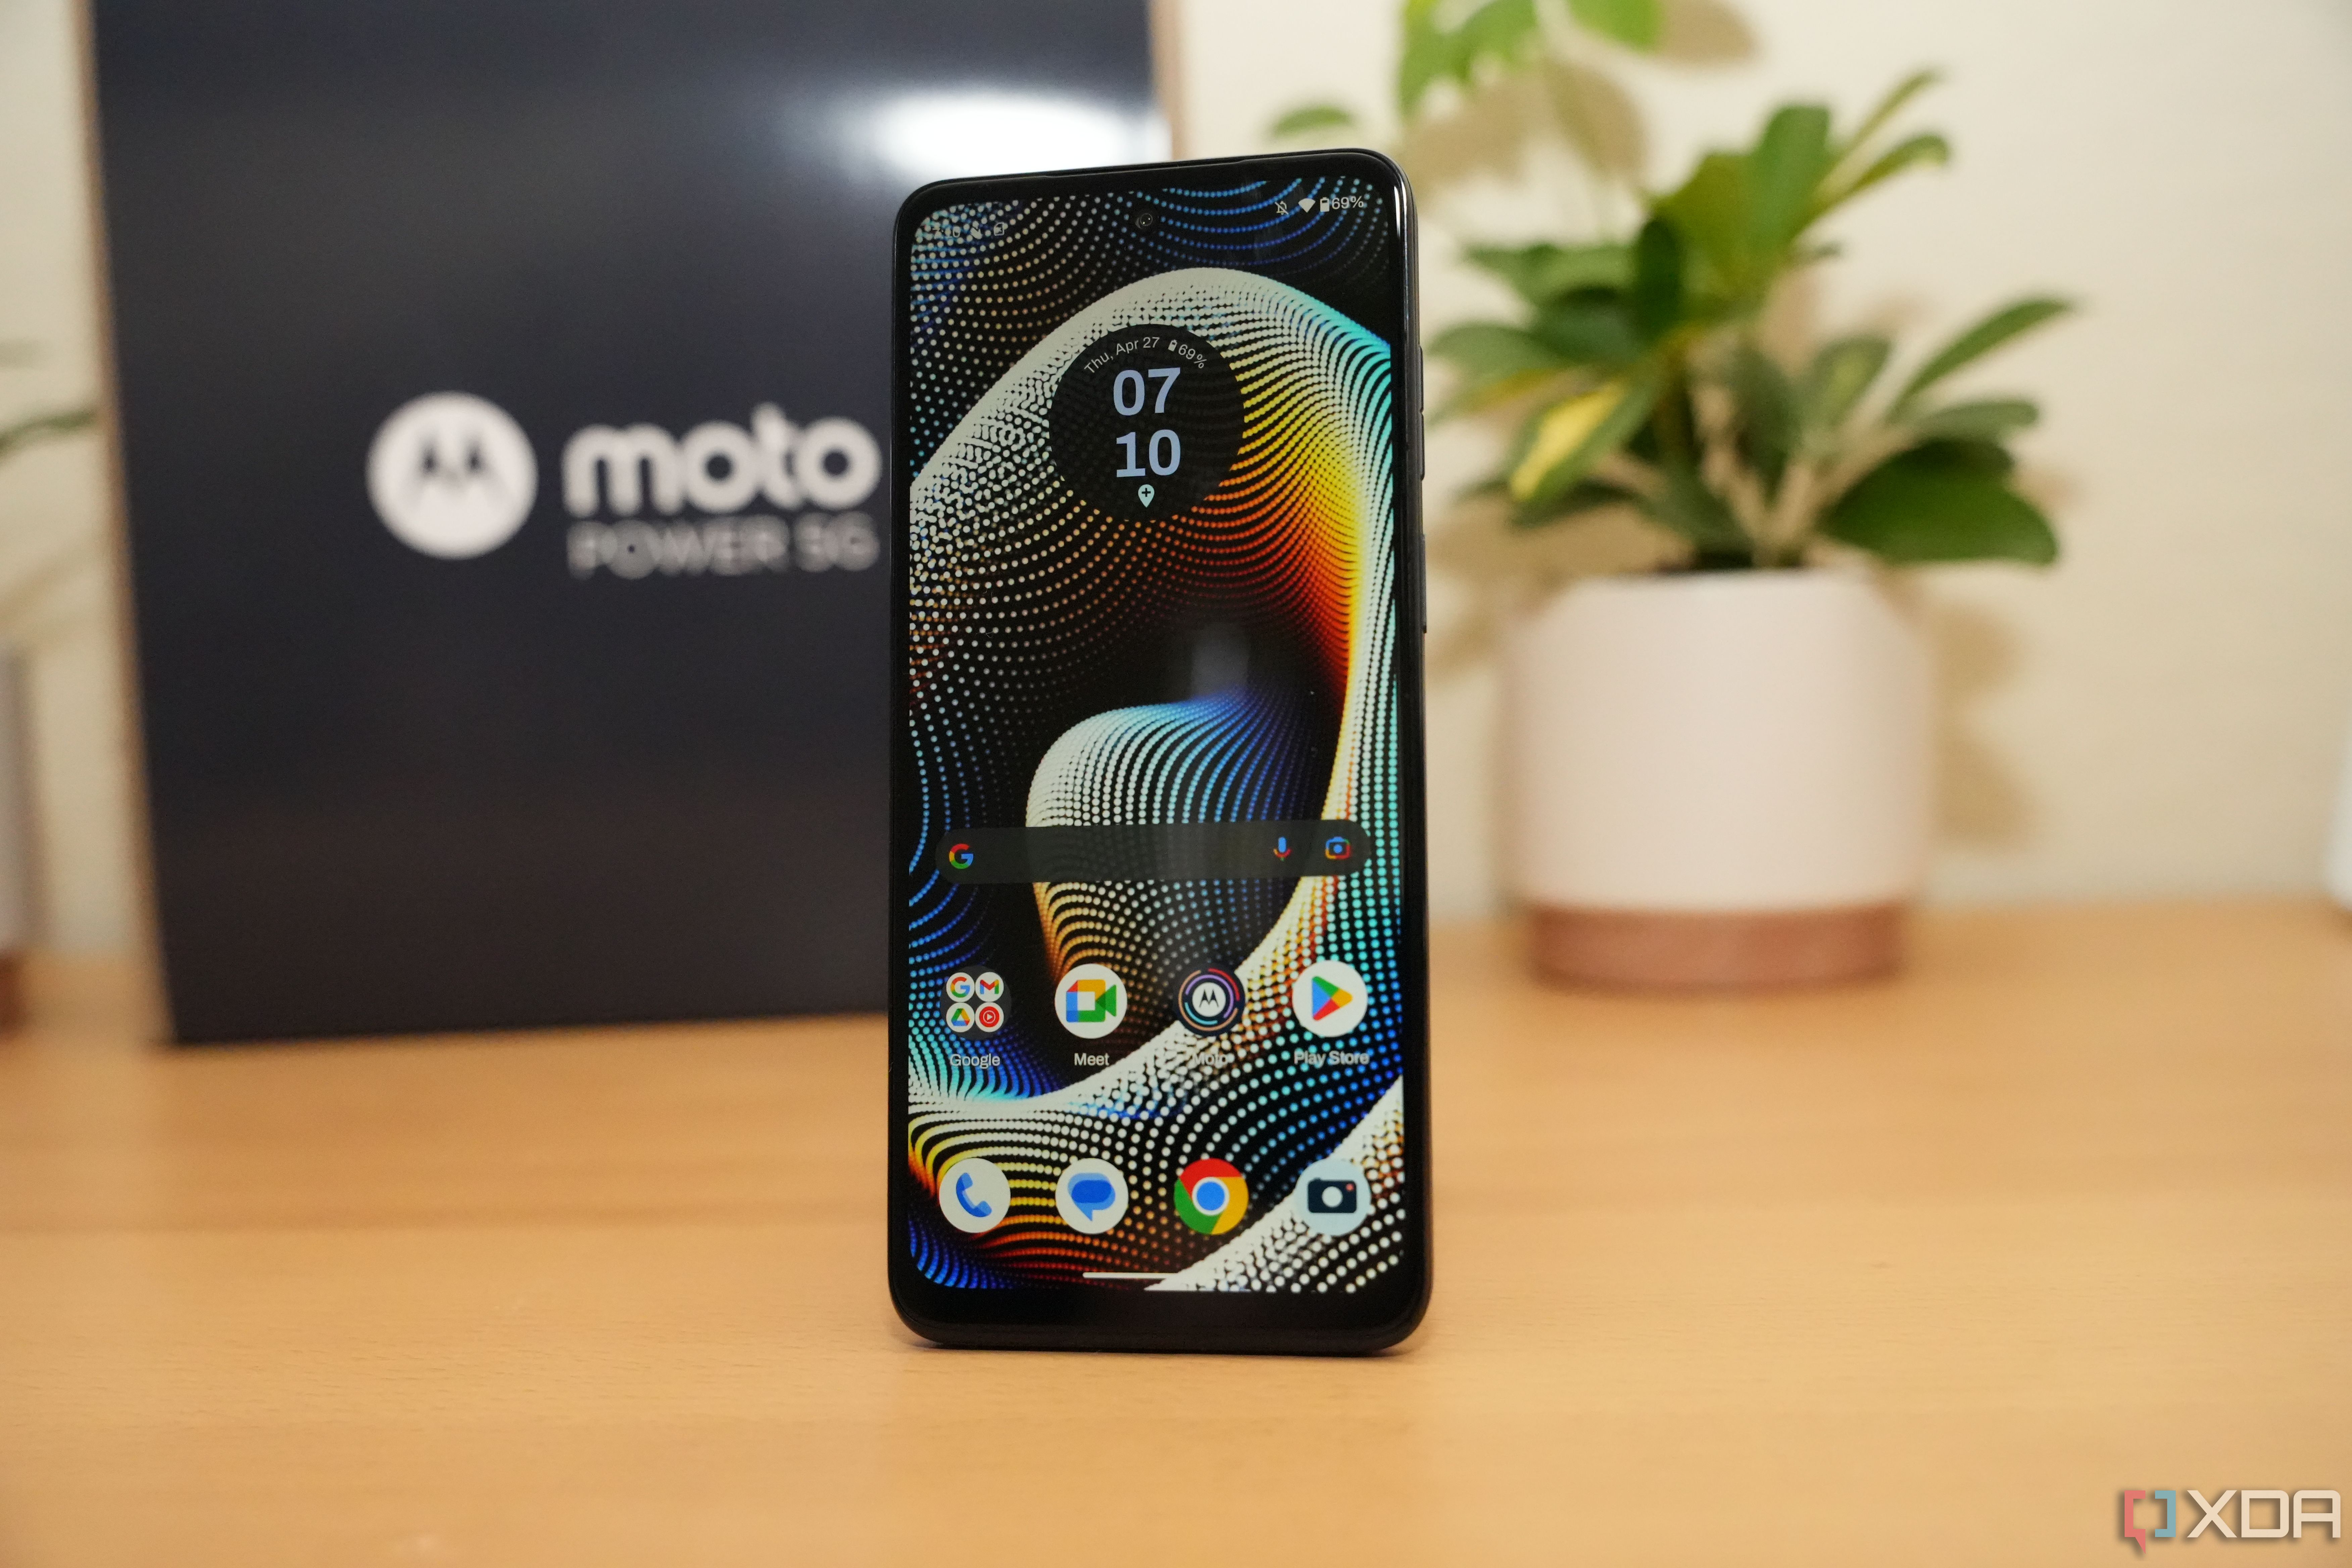 Motorola G Power 5G 2023  in front of Moto G Power box and a plant